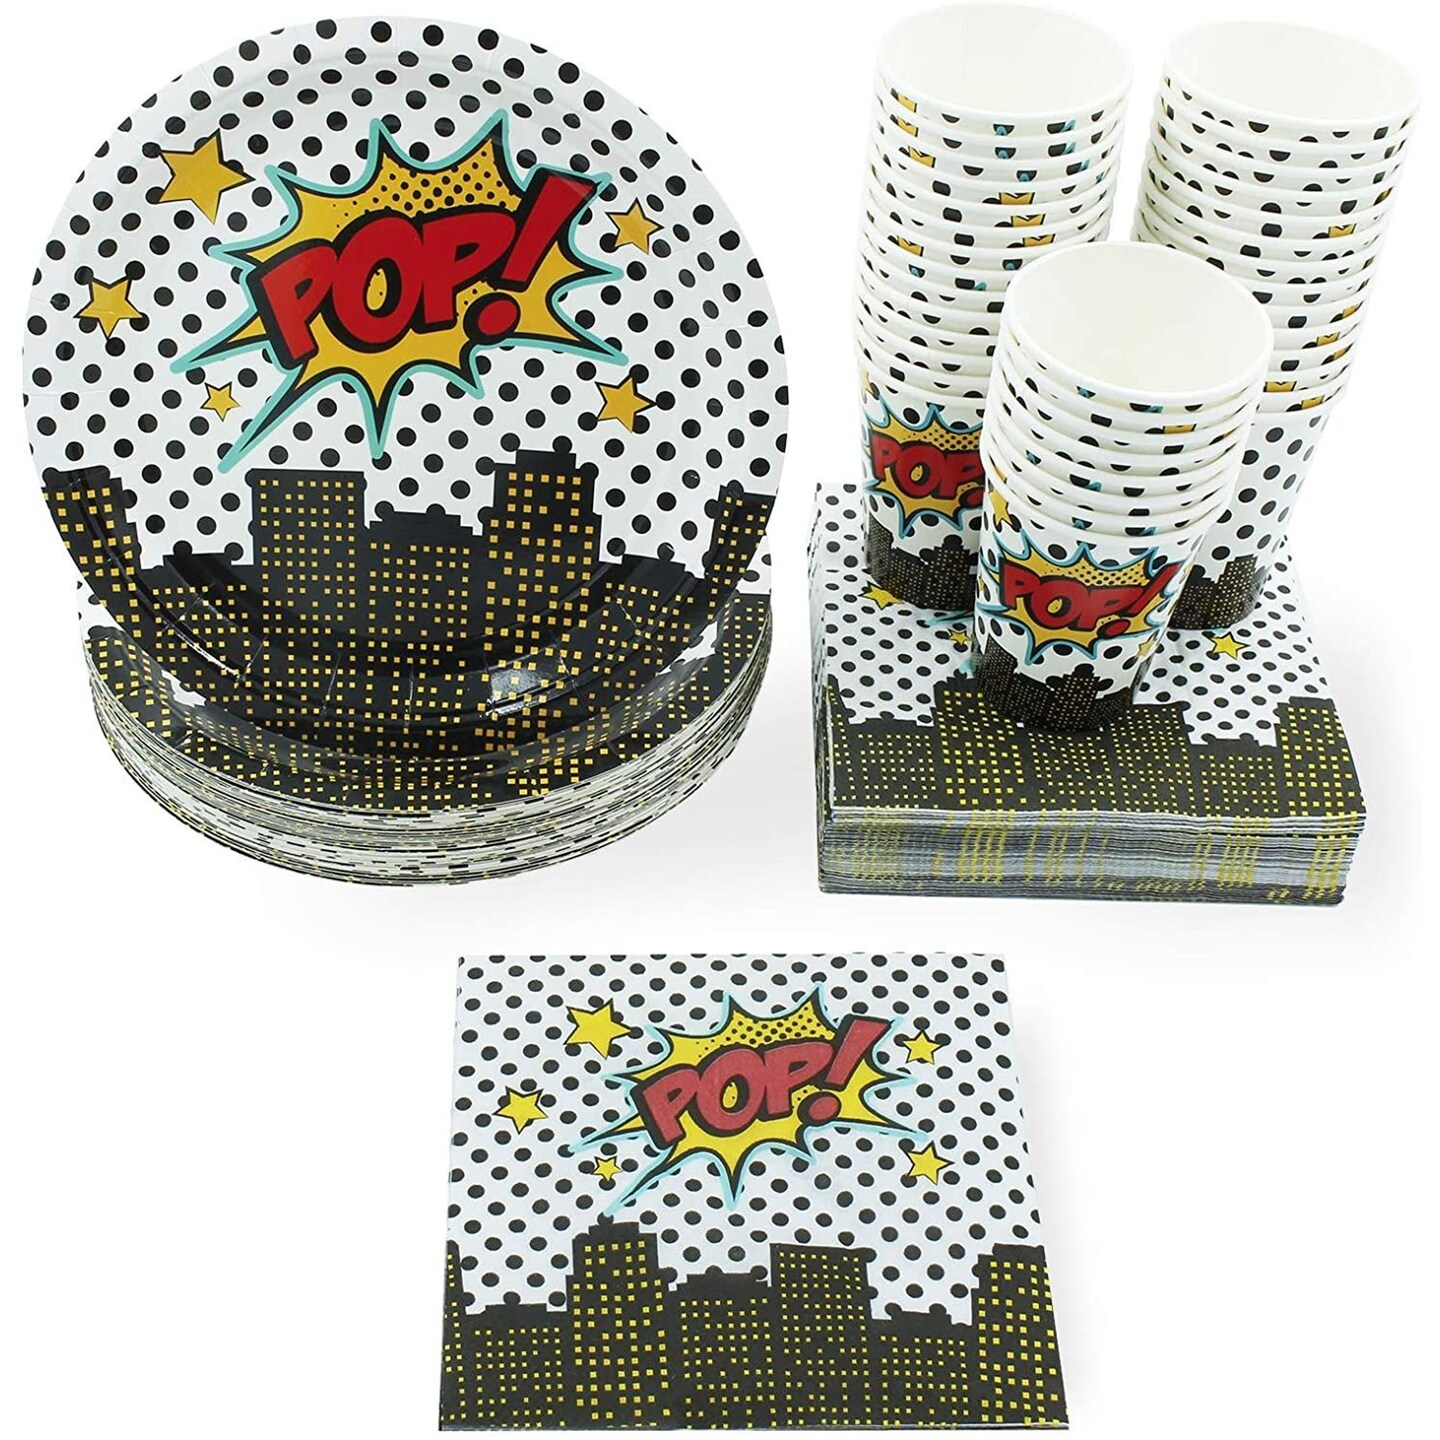 Hero Party Pack, Paper Plates, Napkins and Cups (Serves 36, 108 Pieces)